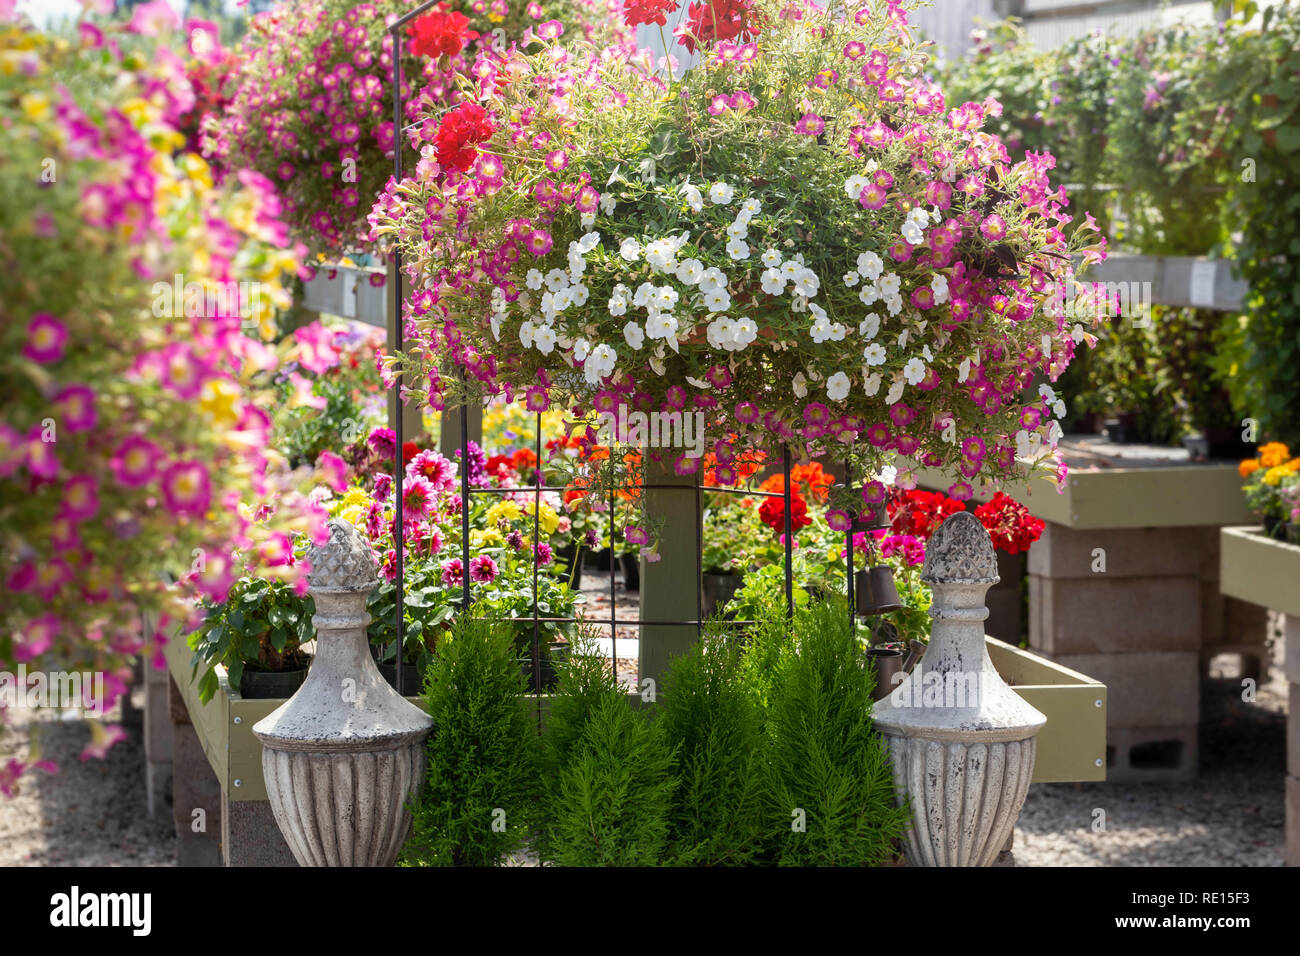 Flower baskets displayed for sale in a summertime garden center Stock Photo